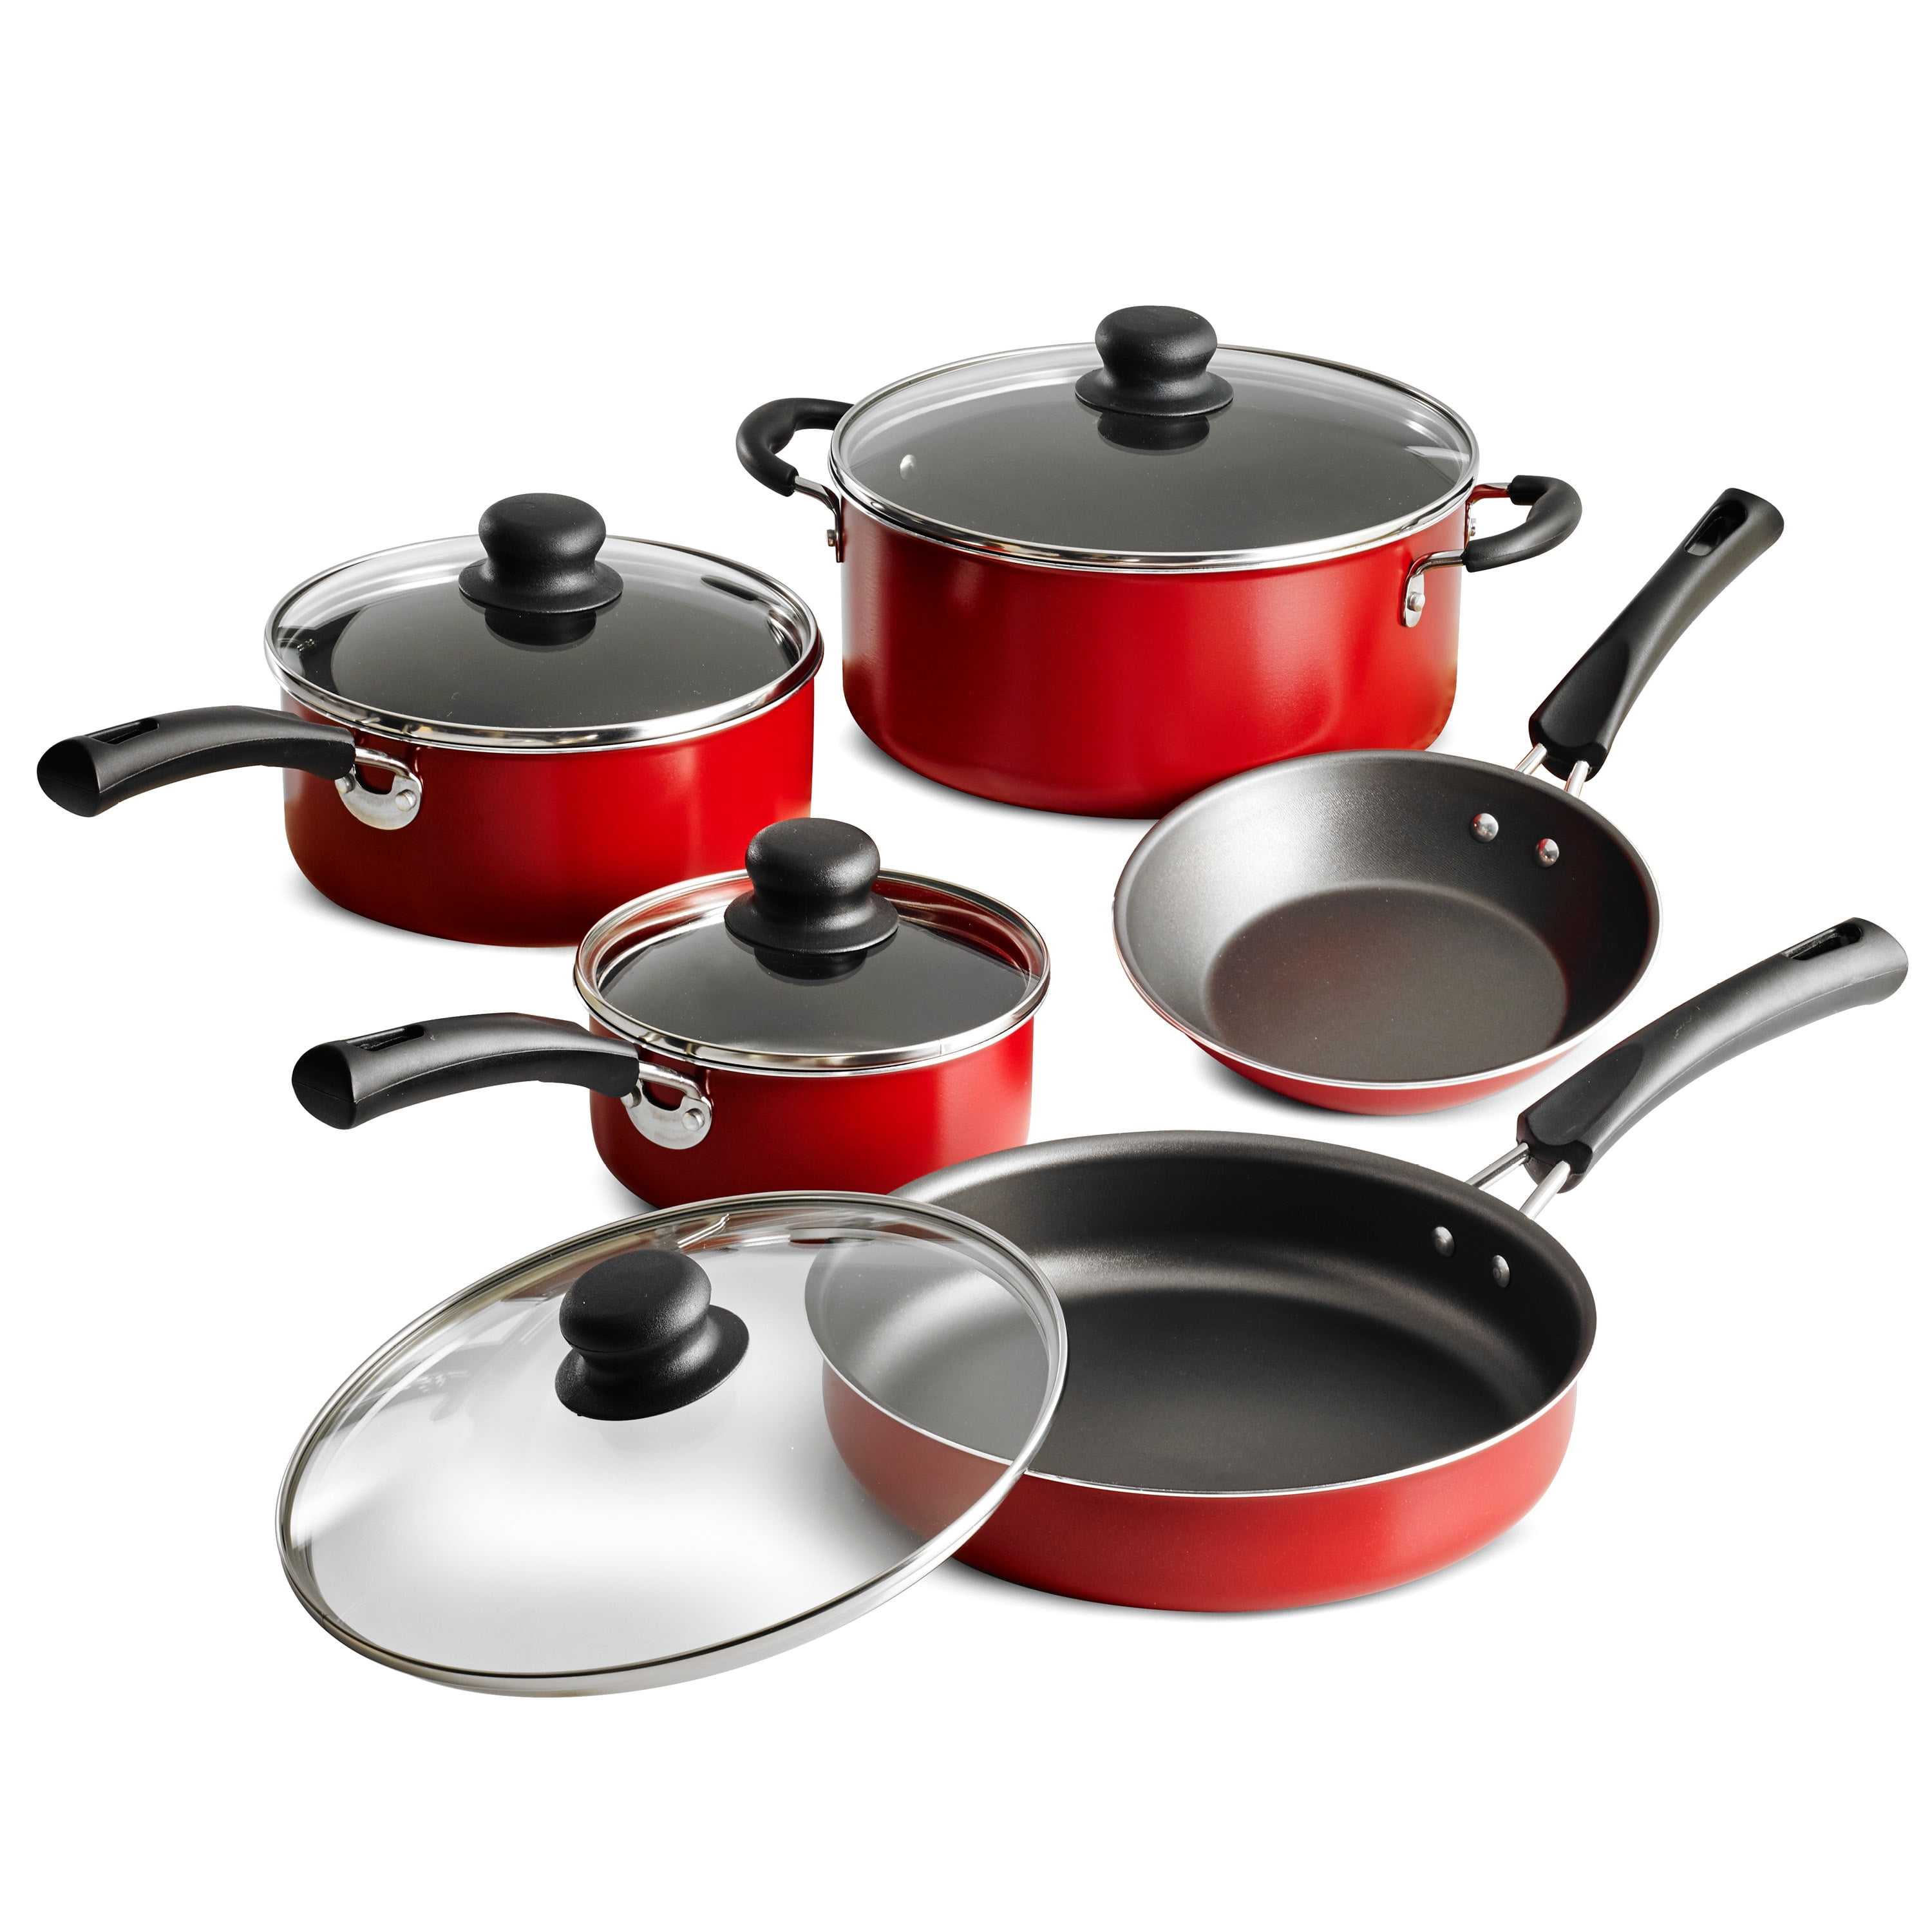 Kitchen Cookware Set 18 Piece Nonstick Frying Pans Pots Lid Cooking Red New! 